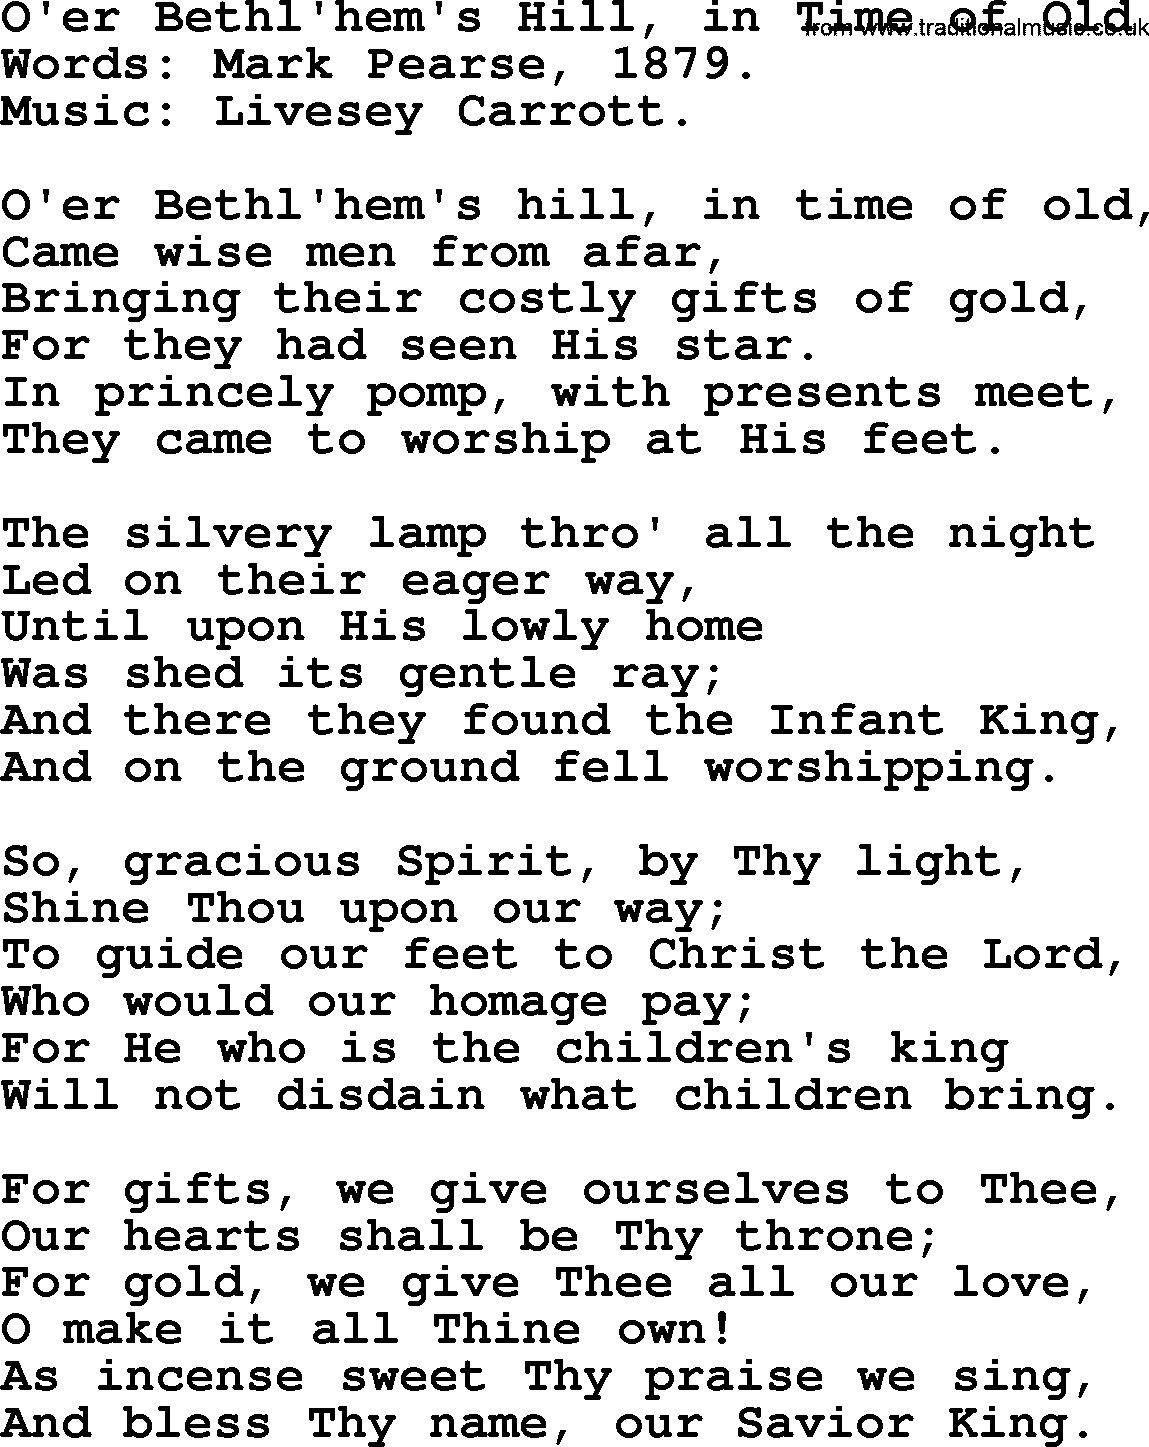 Christmas Hymns, Carols and Songs, title: O'er Bethl'hem's Hill, In Time Of Old, lyrics with PDF